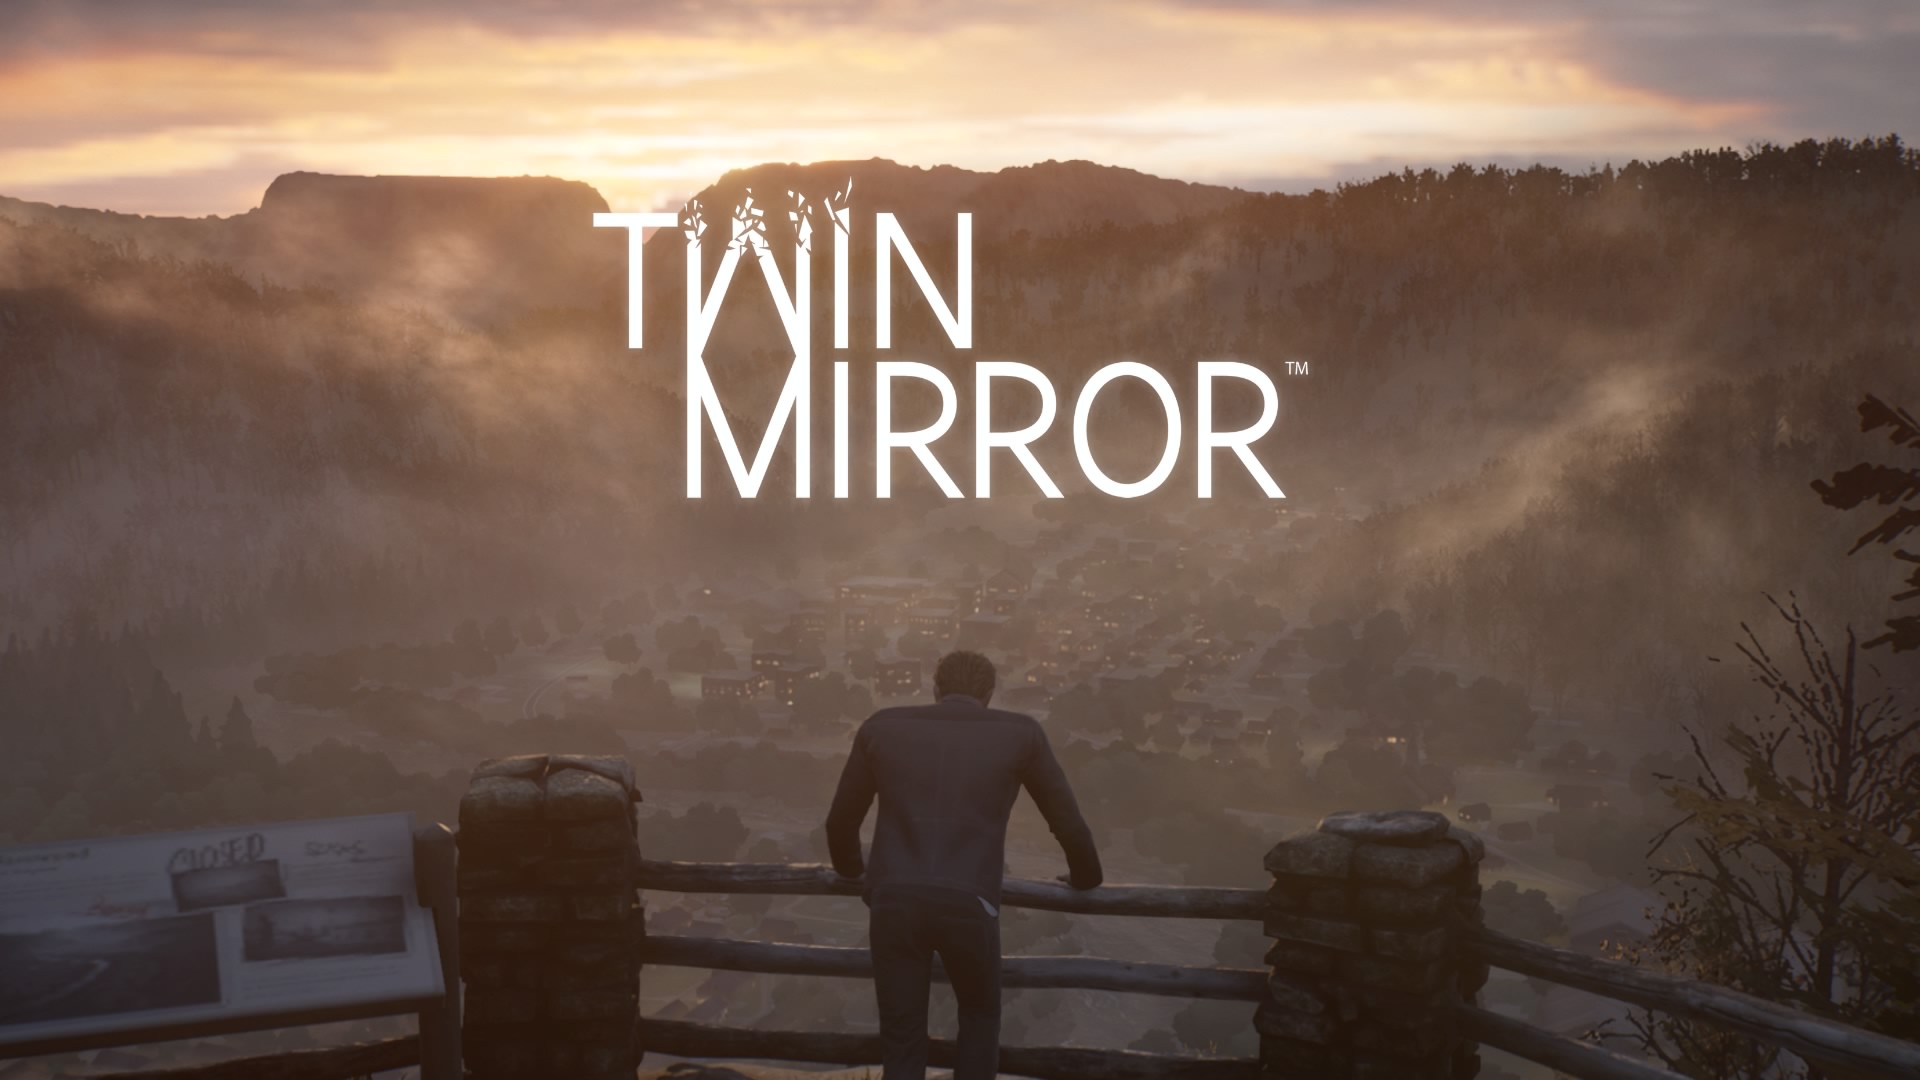 Twin Mirror 2020 Wallpapers